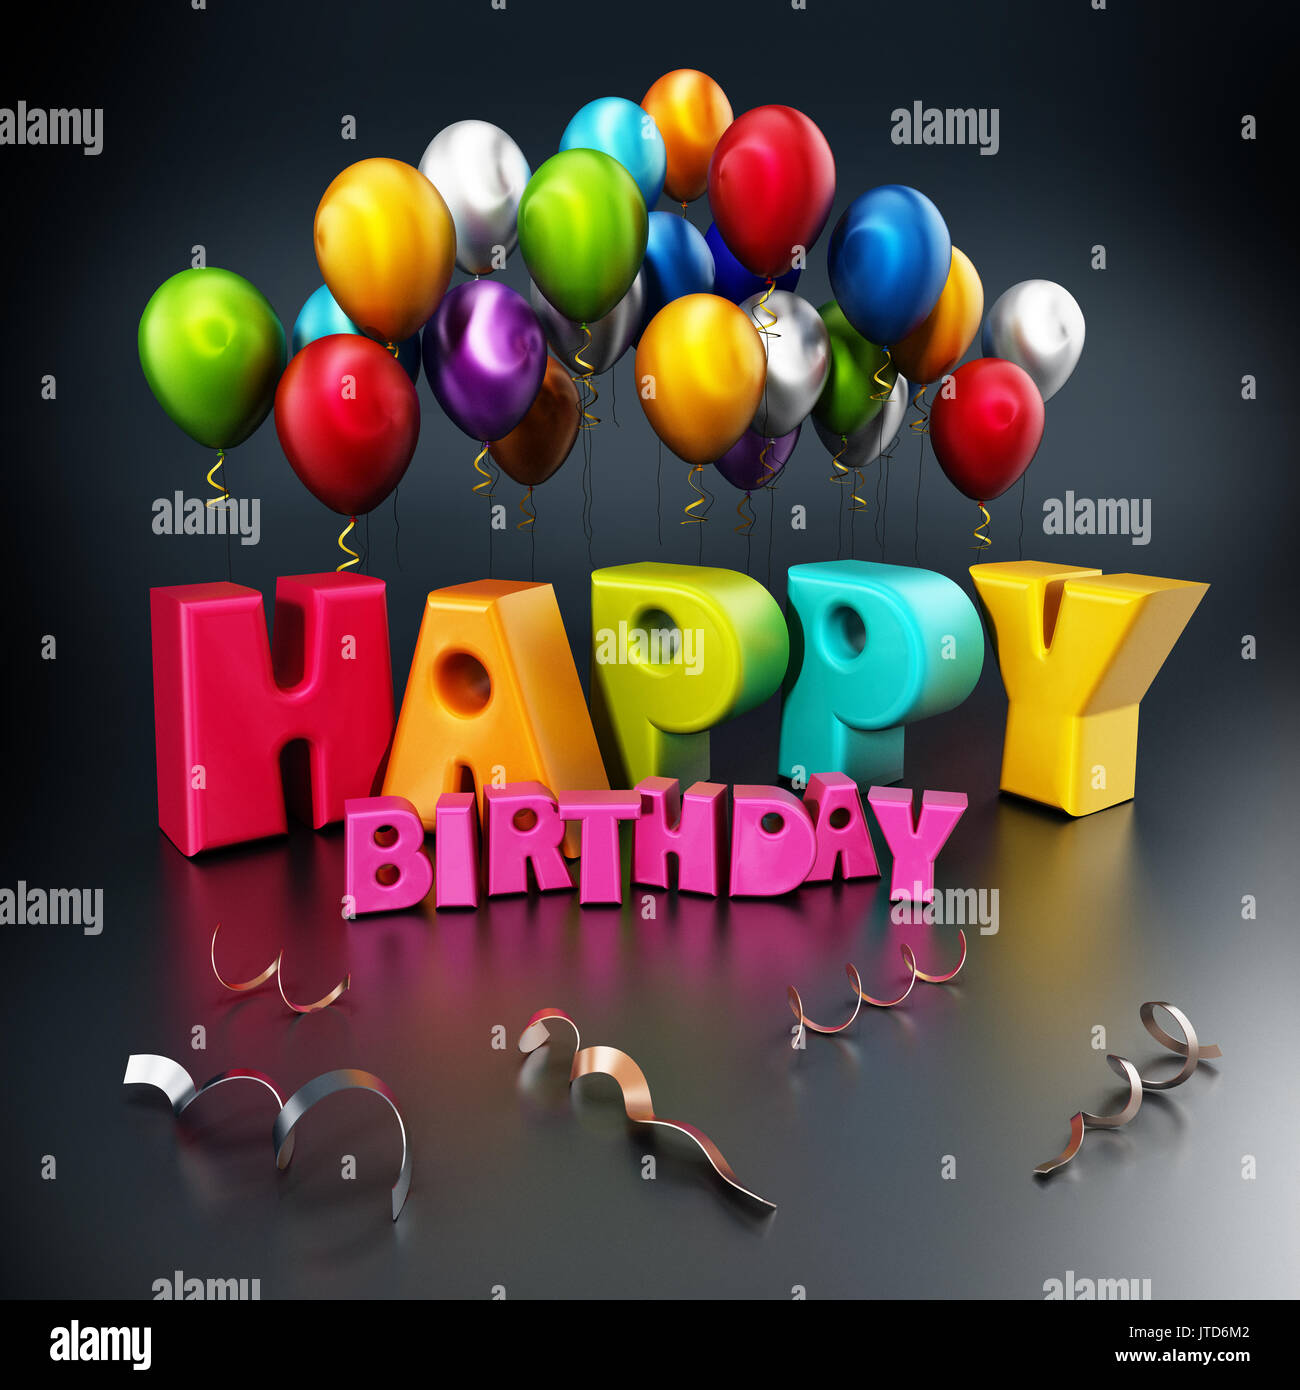 Happy Birthday Text And Party Balloons 3d Illustration Stock Photo Alamy